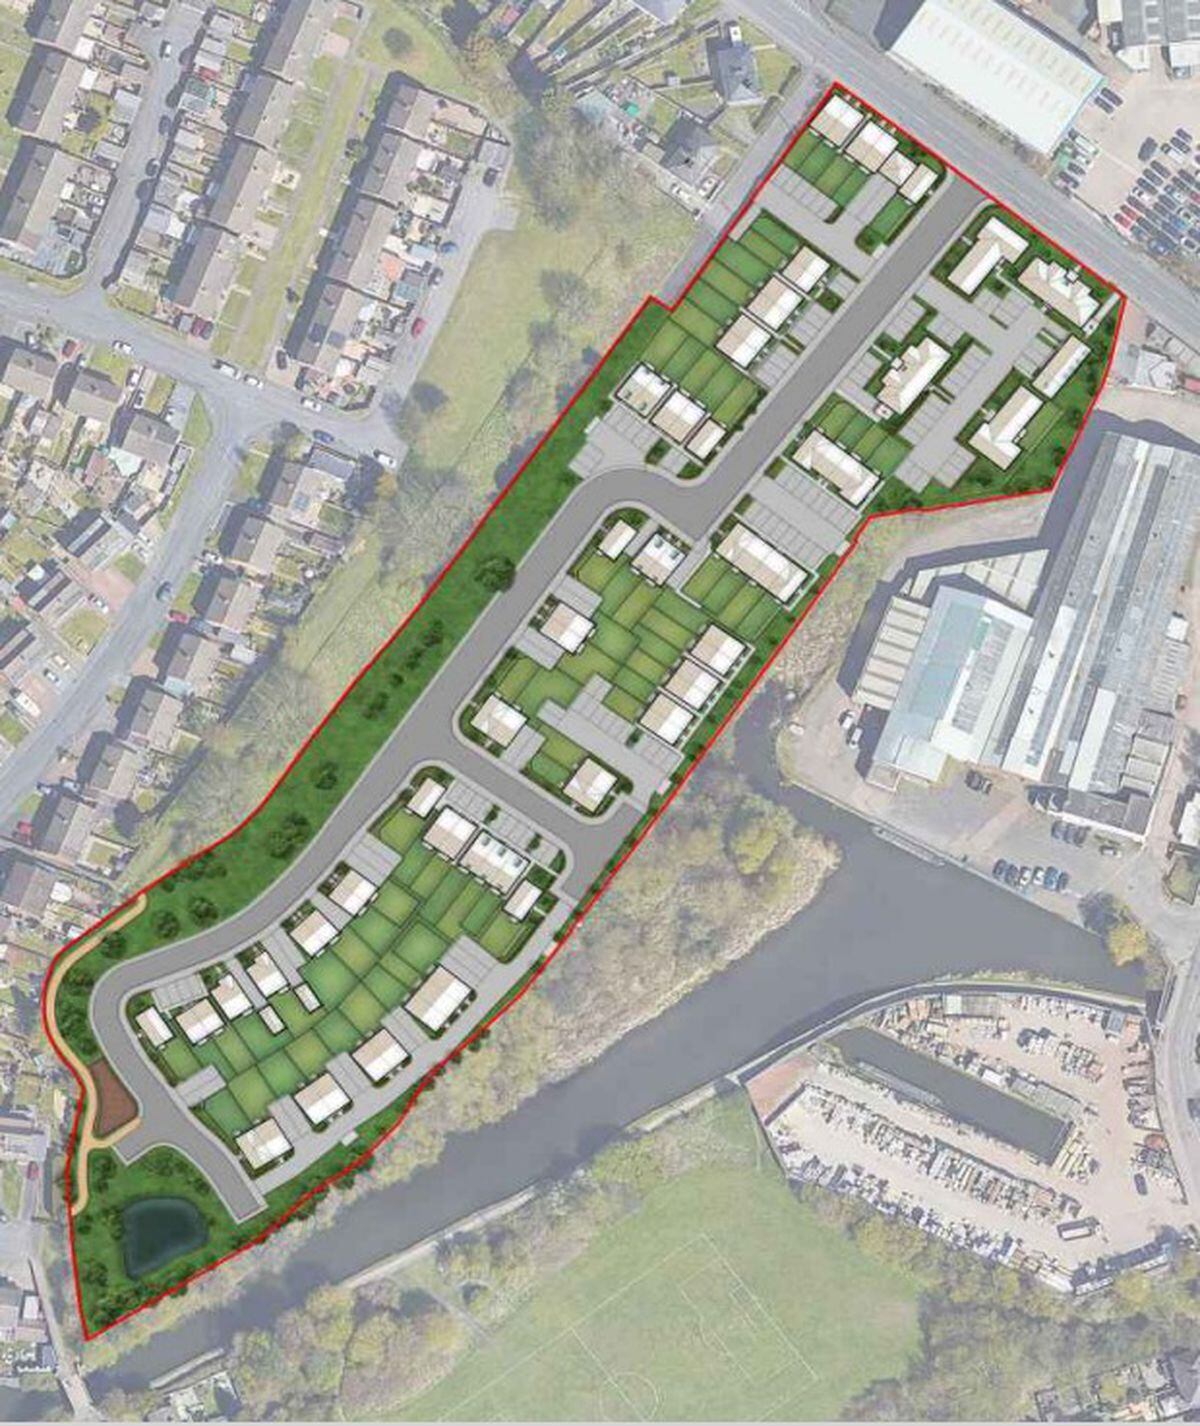 The proposed development on Marriott Road has hit a stumbling block